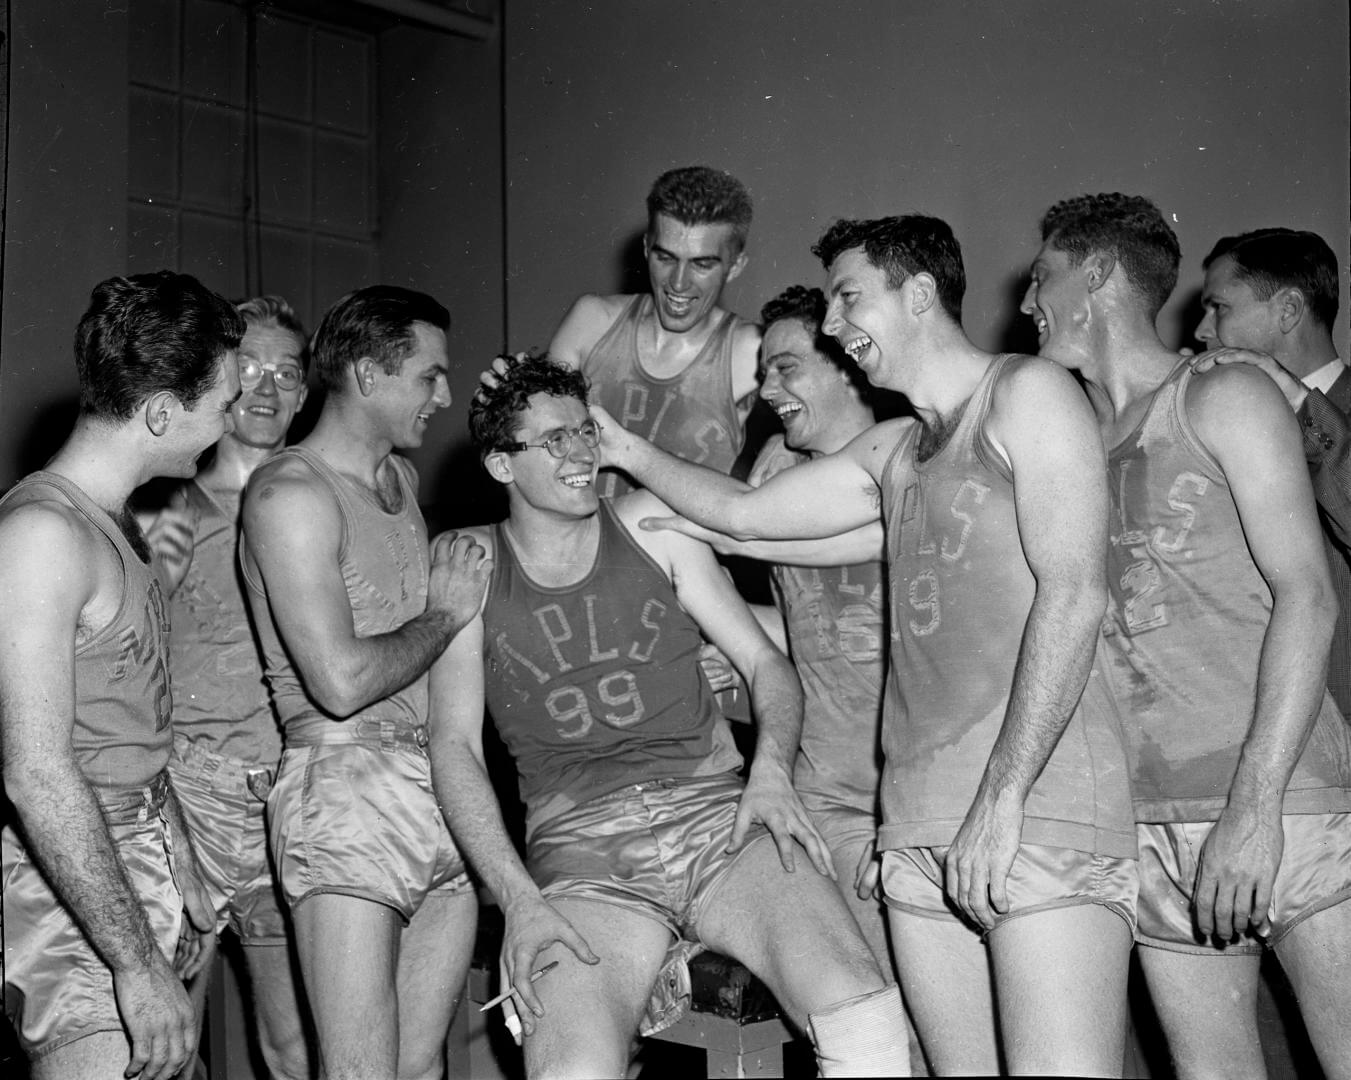 Minnneapolis Lakers teammates congradulate George Milken after the 6-foot 10-inch wizard racked up 48 points in a 101-74 victory against the New York Knicks at Madison Square Garden. (Photo by Bill Meurer/NY Daily News via Getty Images)